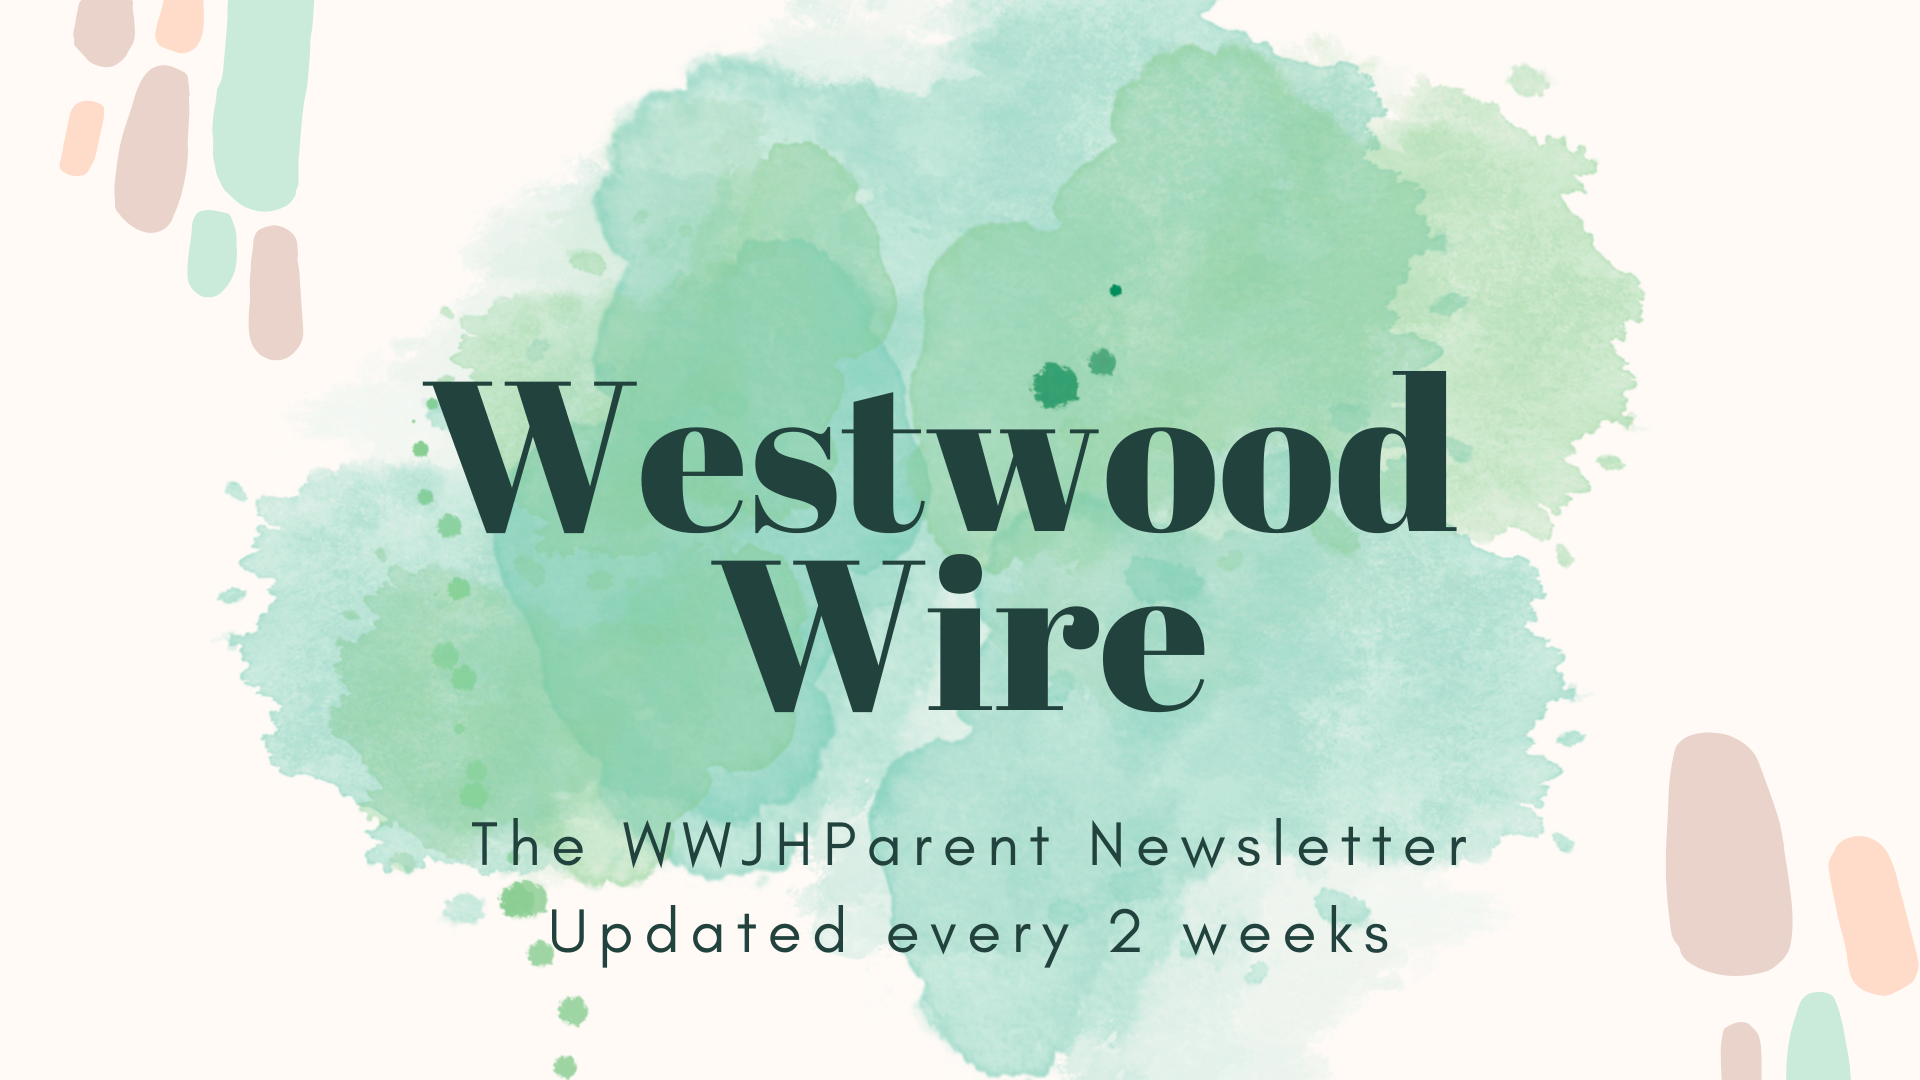 Westwood Wire Image WWJH Parent Newsletter updated every 2 weeks